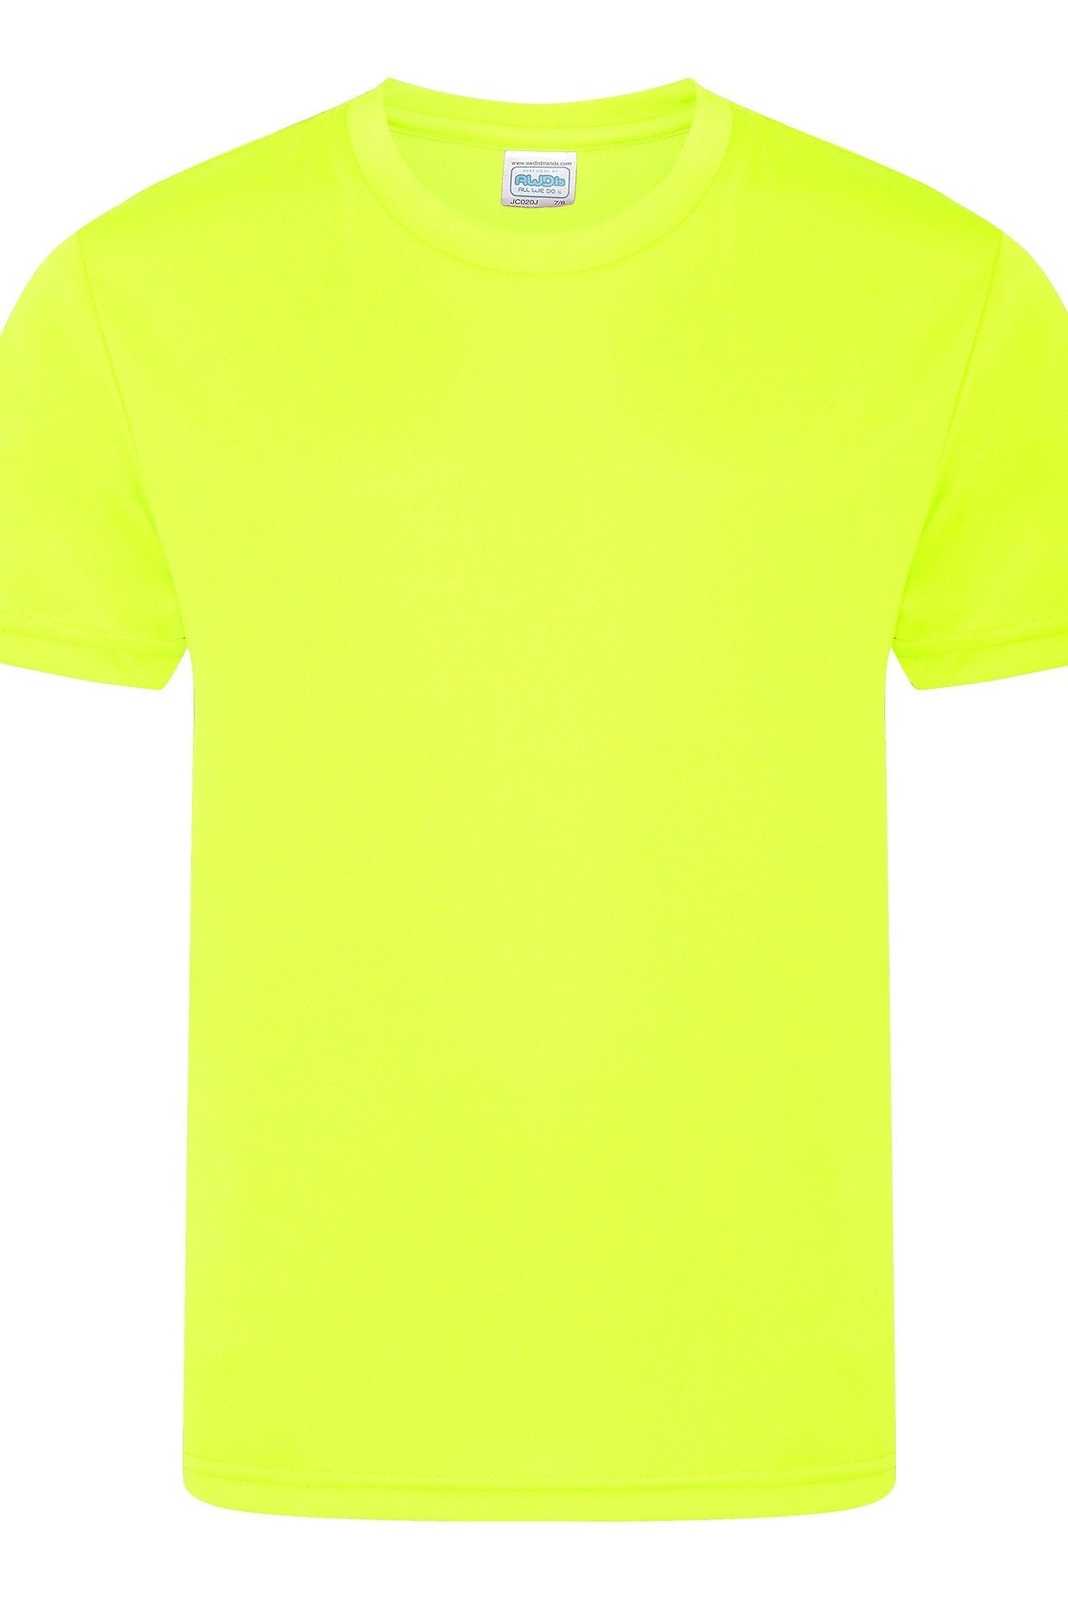 Just Cool JCY001 Youth Cool Tee - Elec Yellow - HIT a Double